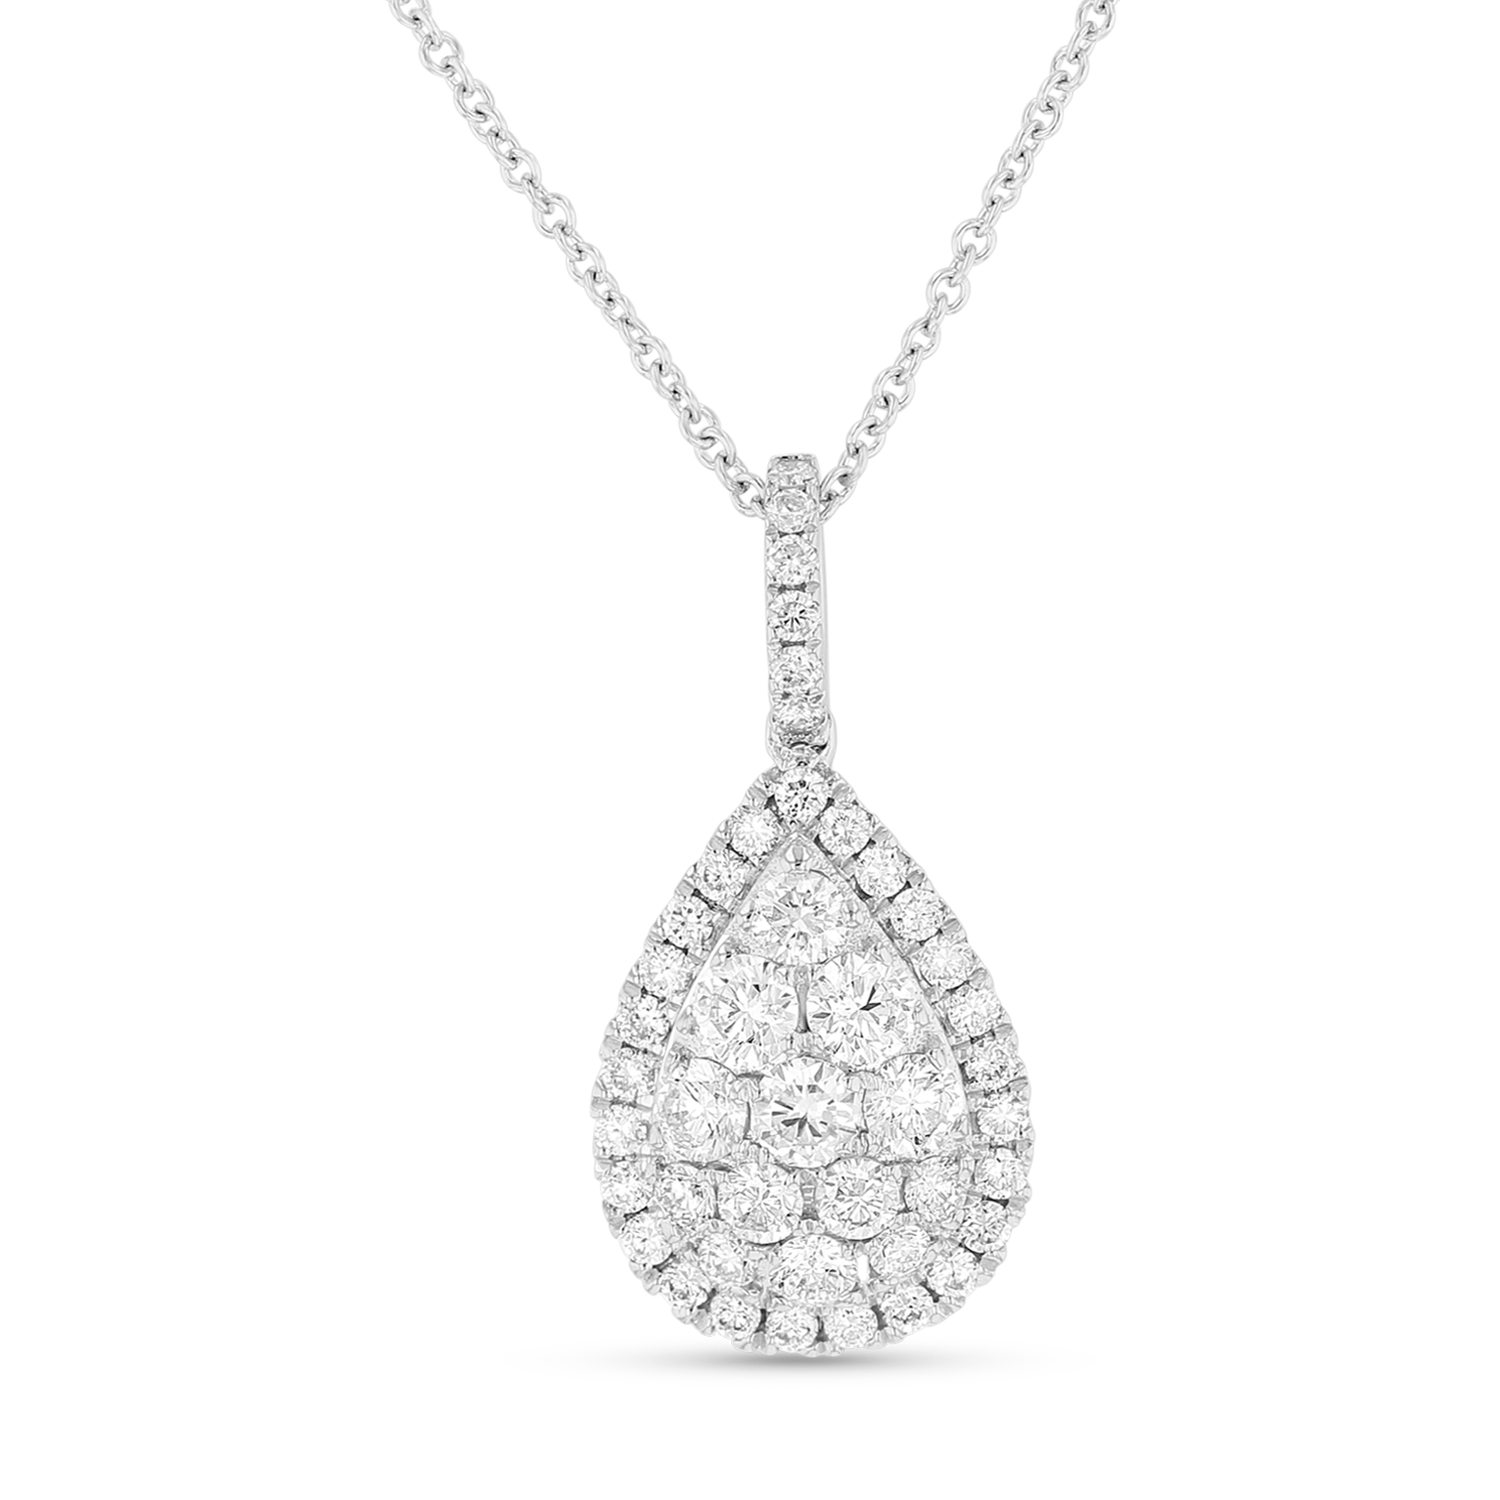 View 0.90ctw Diamond Pear Shaped Cluster Pendant in 18k White Gold